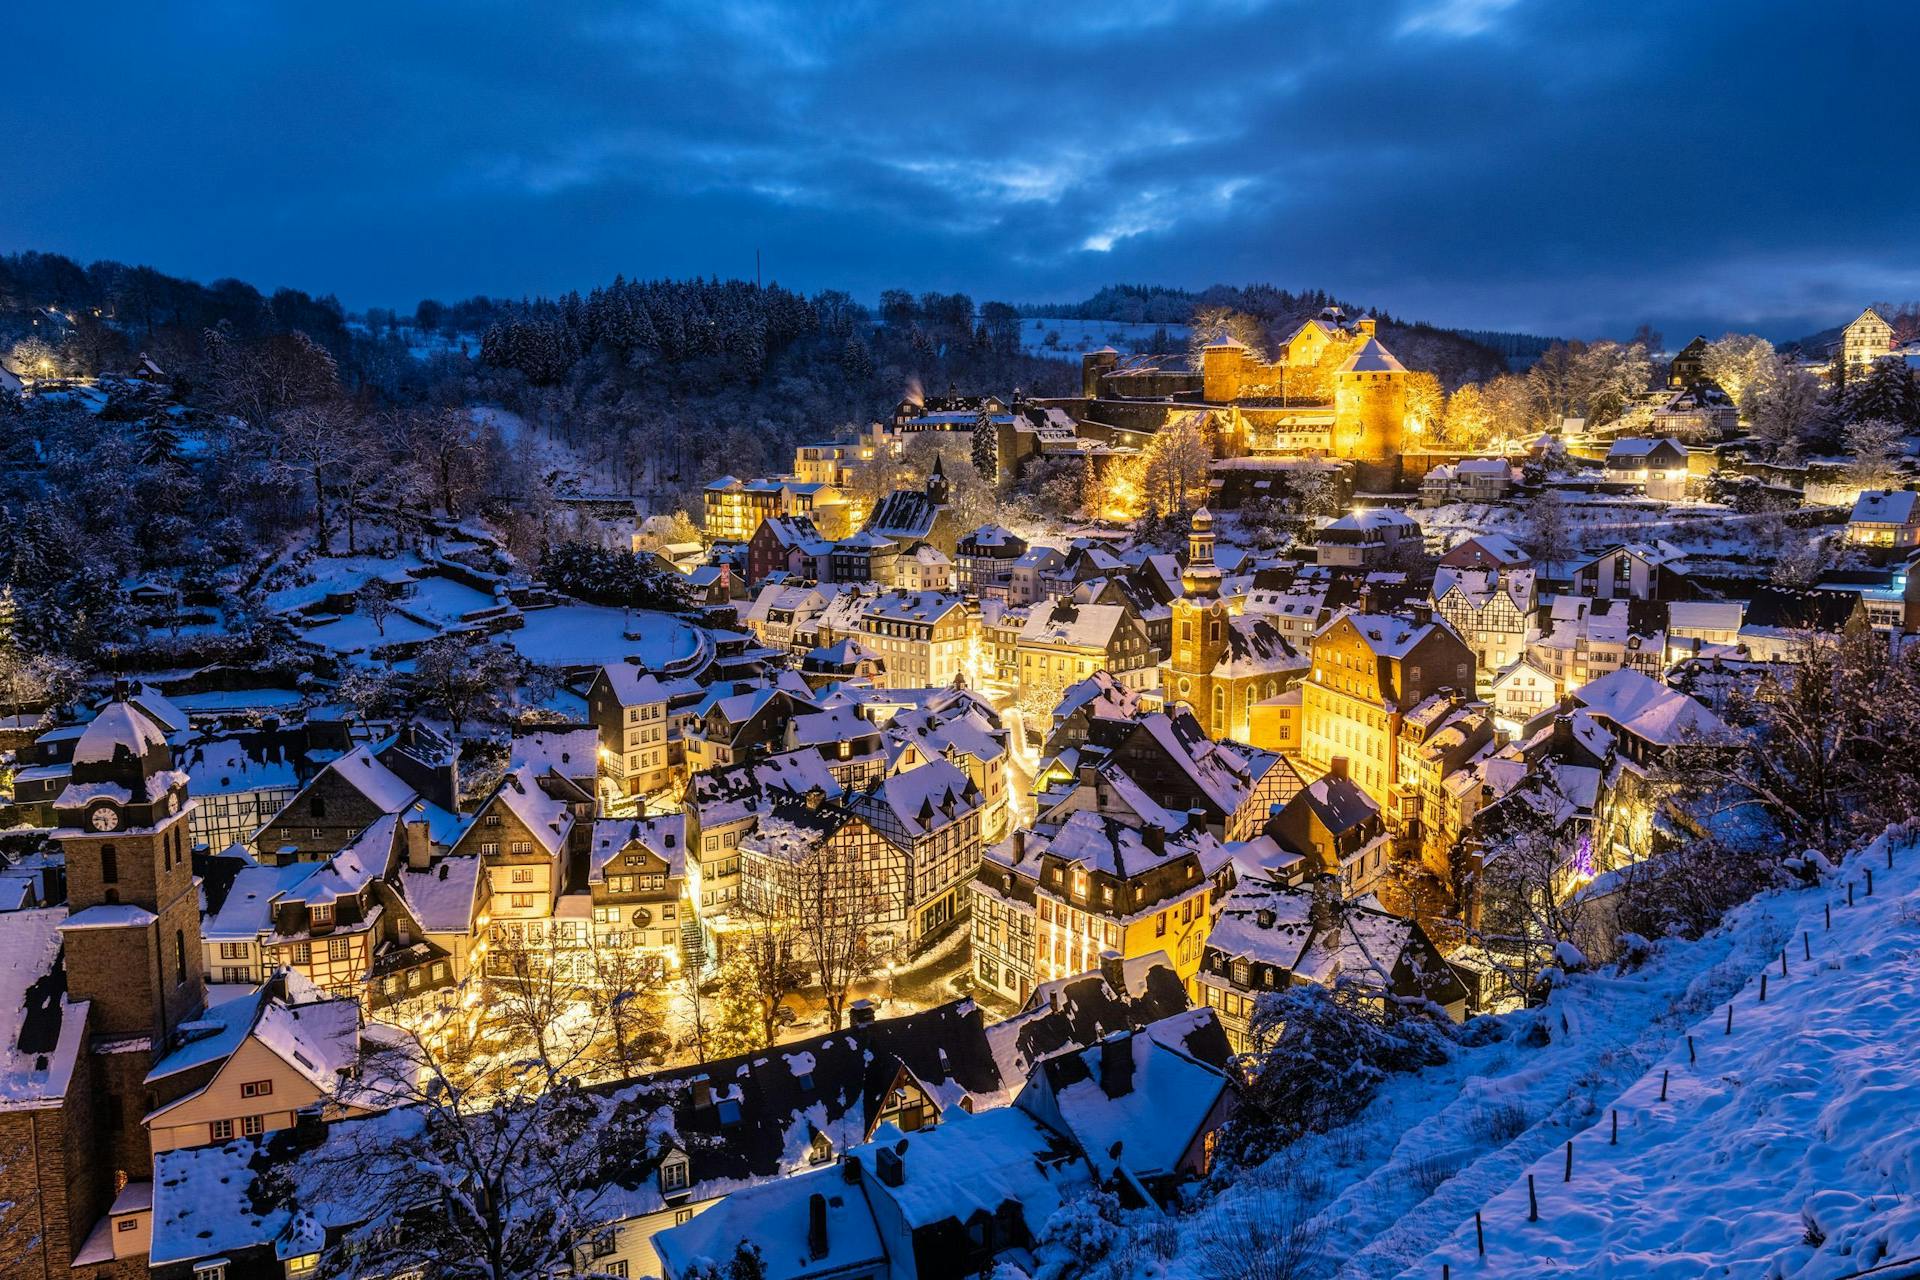 <p>If you are looking for a scenic and historic destination in Germany, look no further than Monschau. The town is full of character, culture, and nature. Don’t miss the Christmas market and the marathon. #Monschau #Eifel #Germany</p><p><br></p>